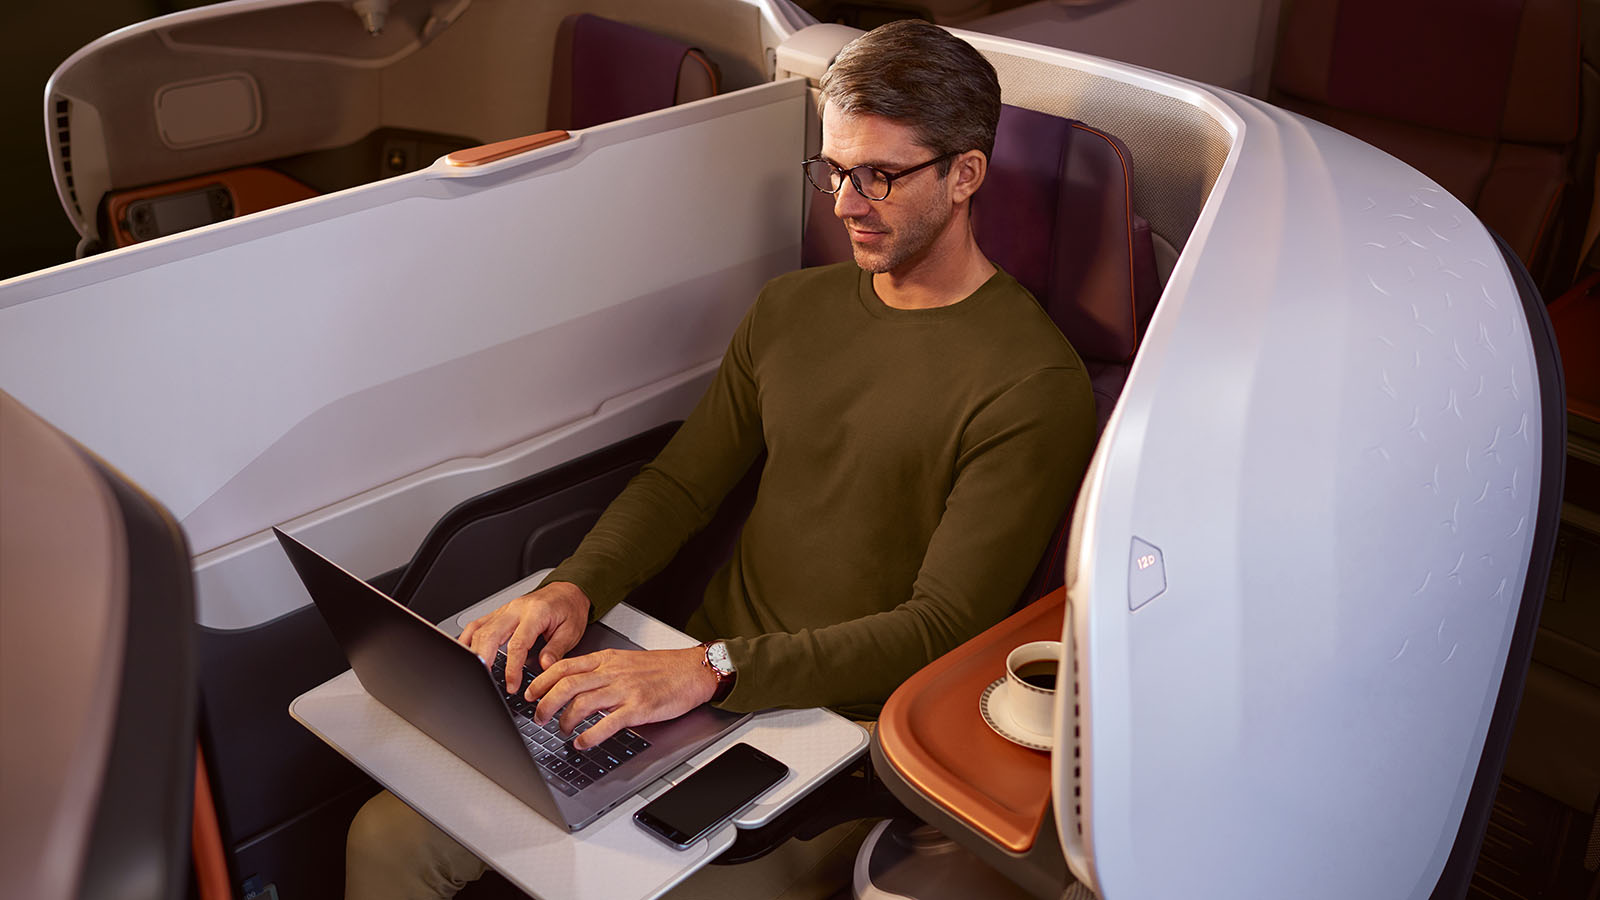 Singapore Airlines Business Class can be booked using KrisFlyer miles from credit card spend